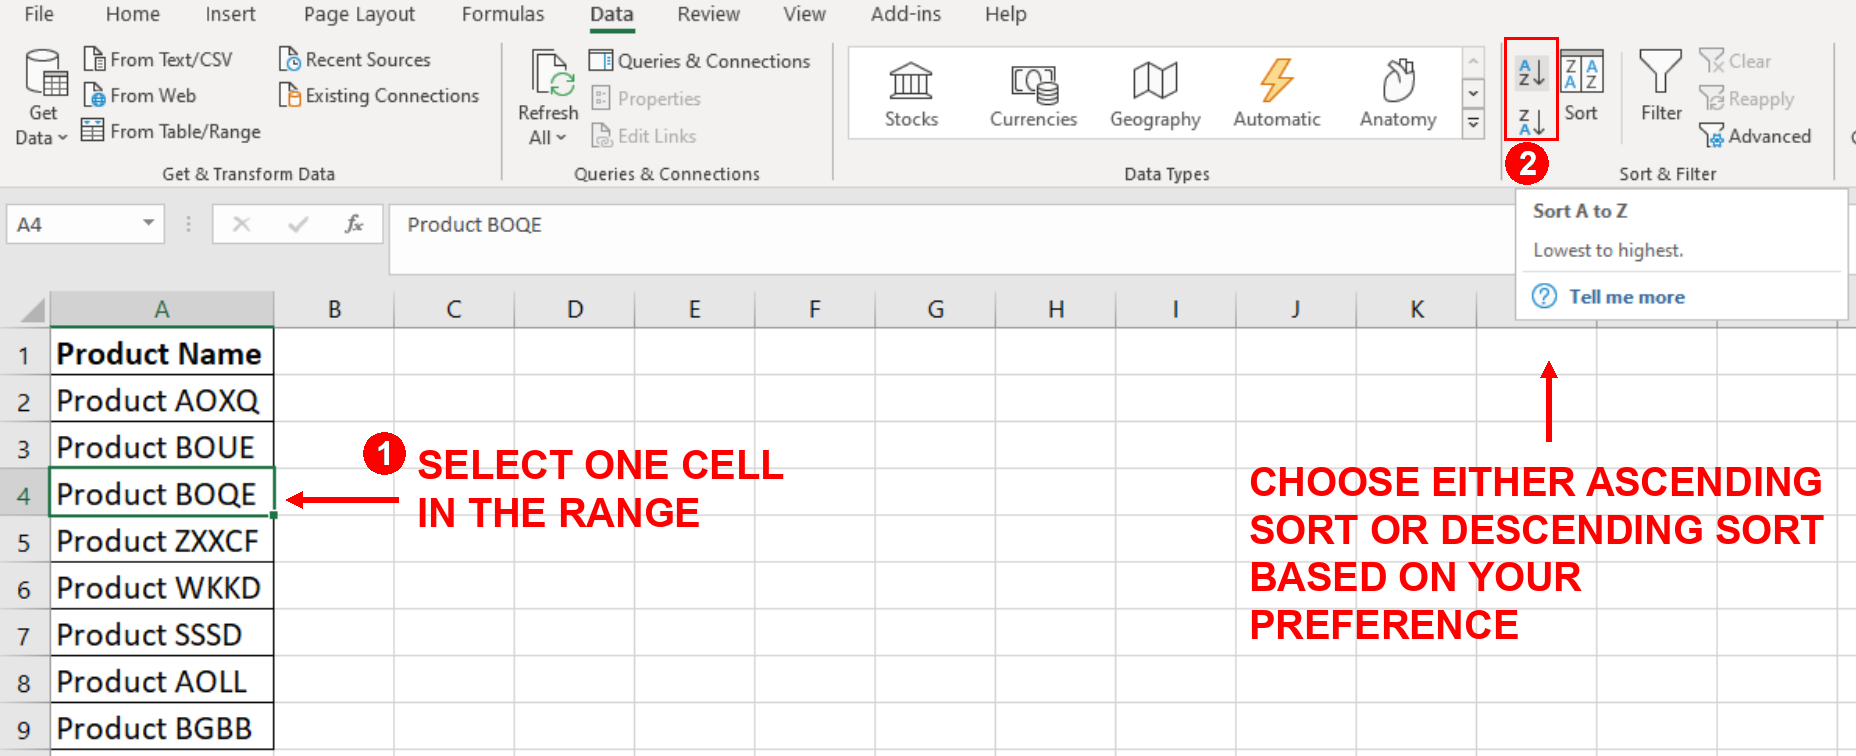 Screenshot showing how to sort data in the source data sheet so that the items in the drop down list are sorted